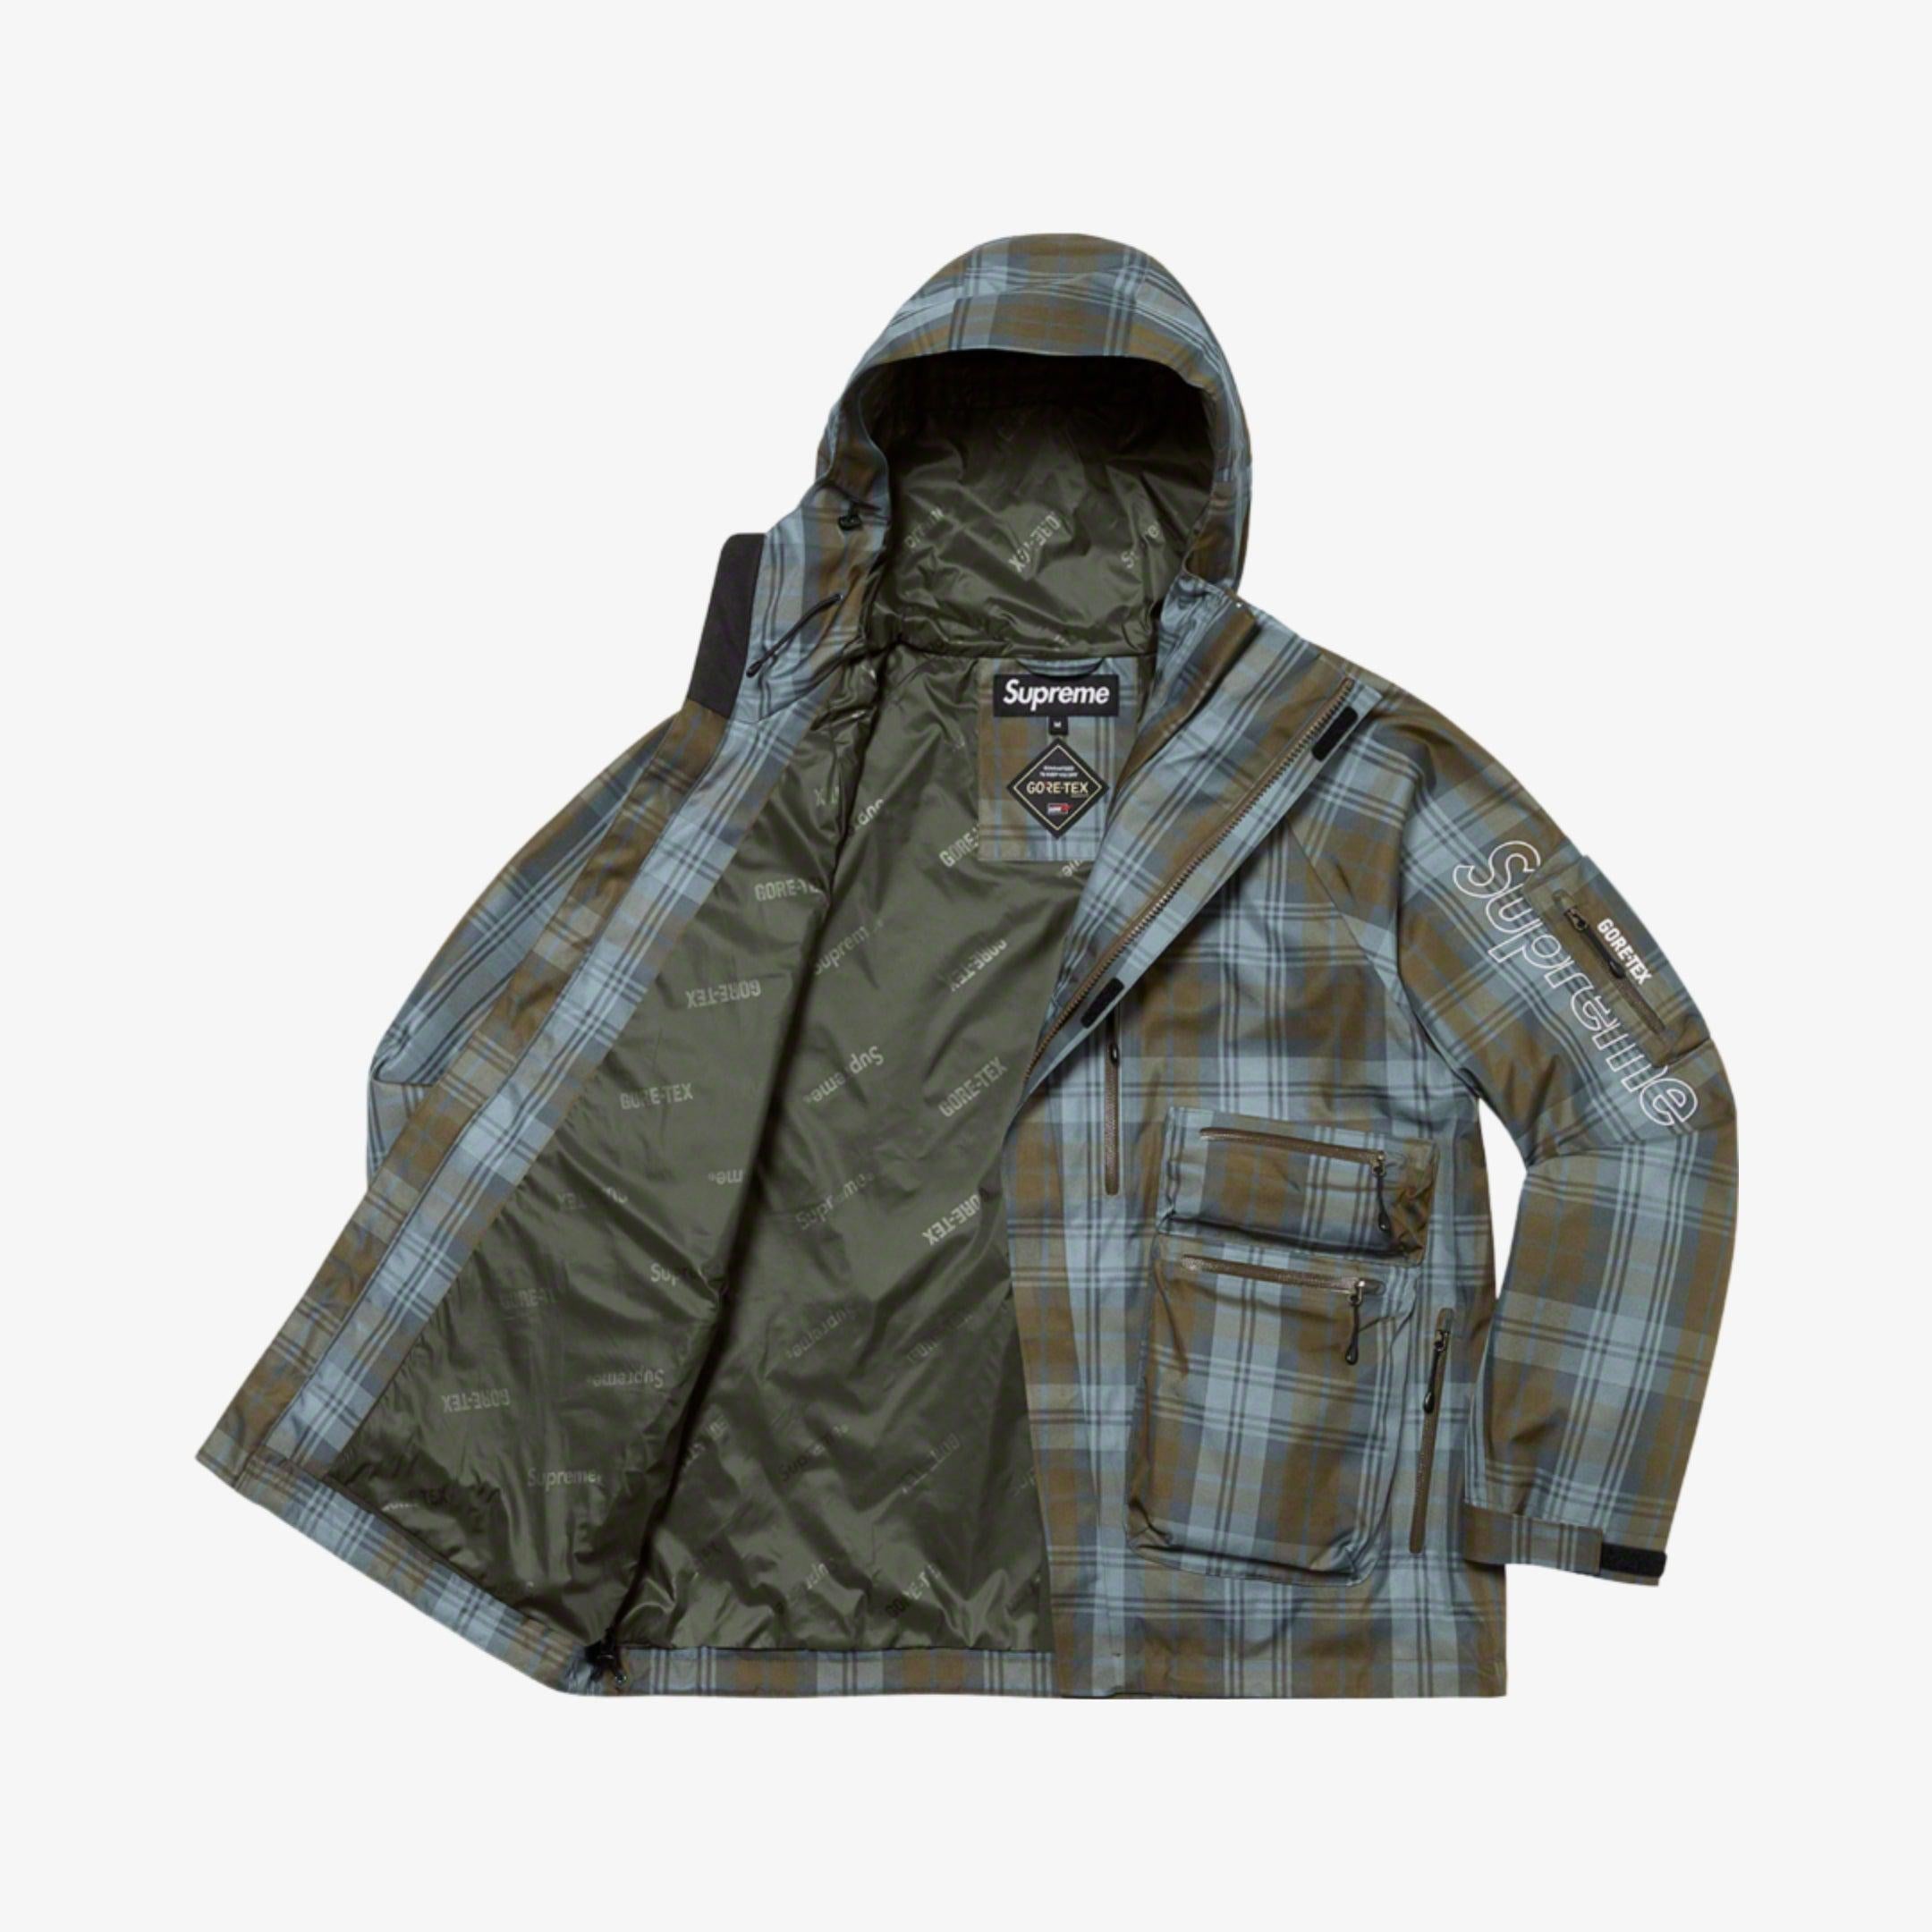 Supreme x GORE-TEX Tech Shell Jacket Olive Plaid FW21 – SOLE SERIOUSS